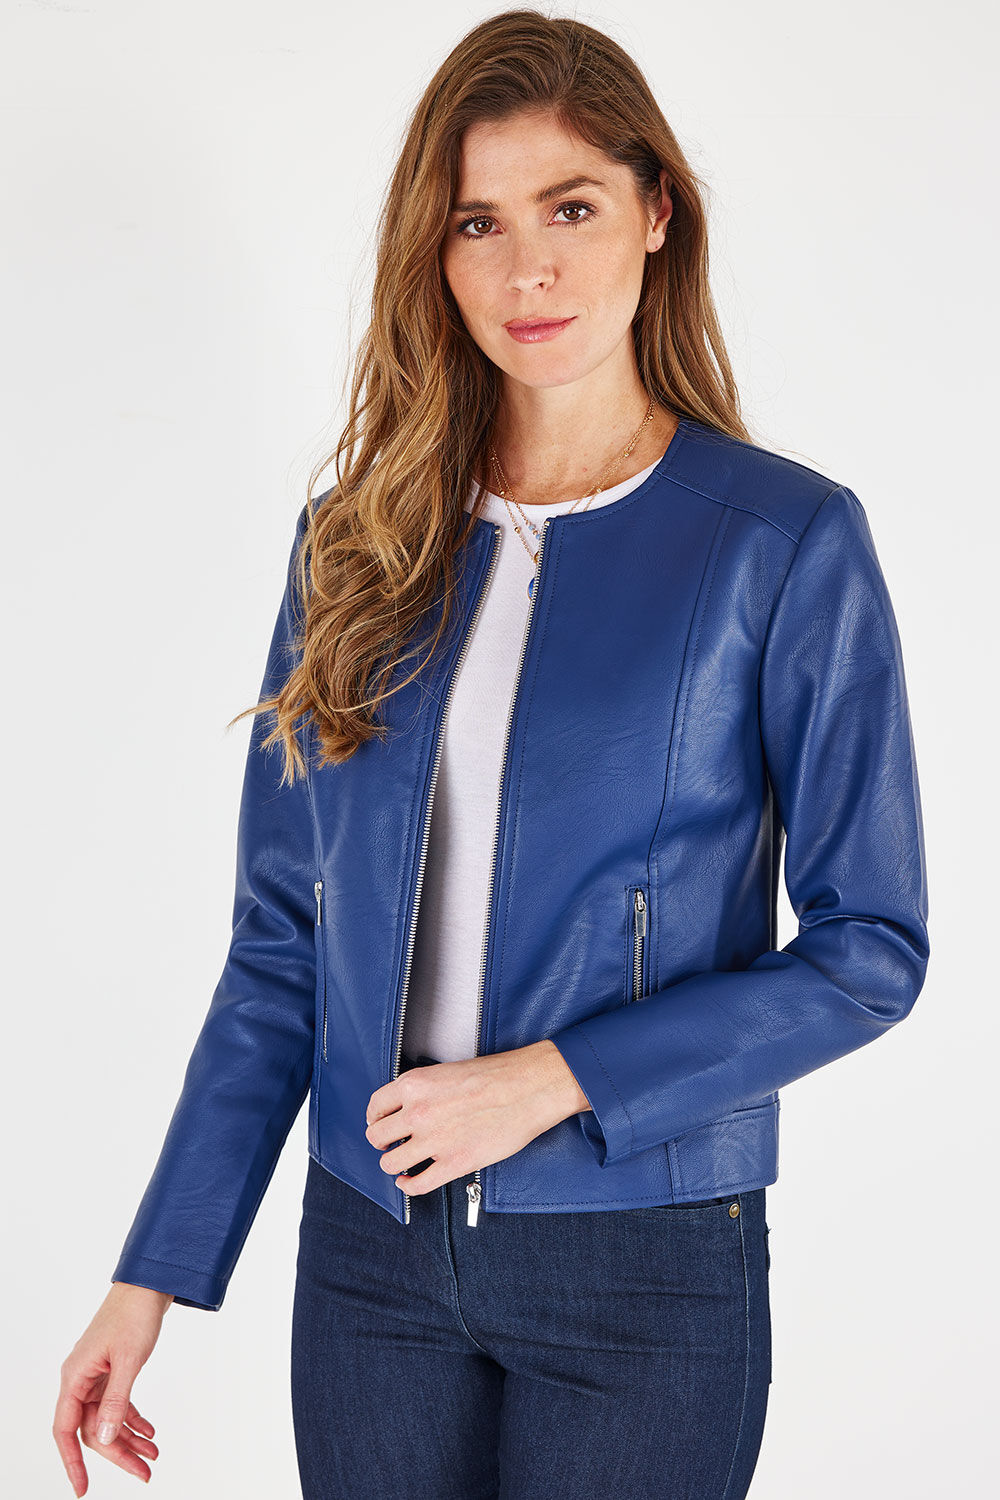 Bonmarche Navy Faux Leather Collarless Jacket, Size: 22